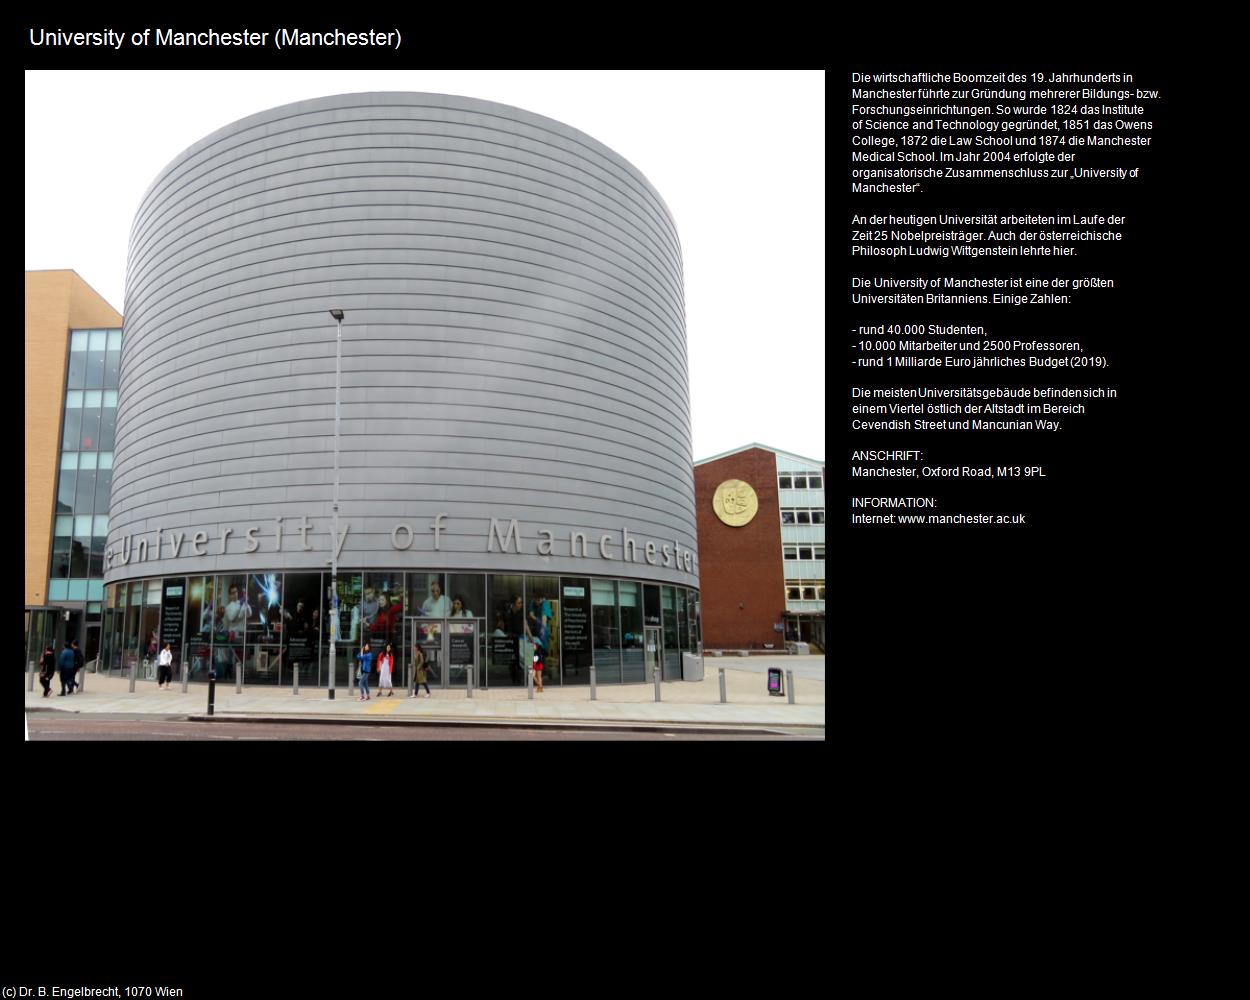 University of Manchester  (Manchester, England  ) in Kulturatlas-ENGLAND und WALES